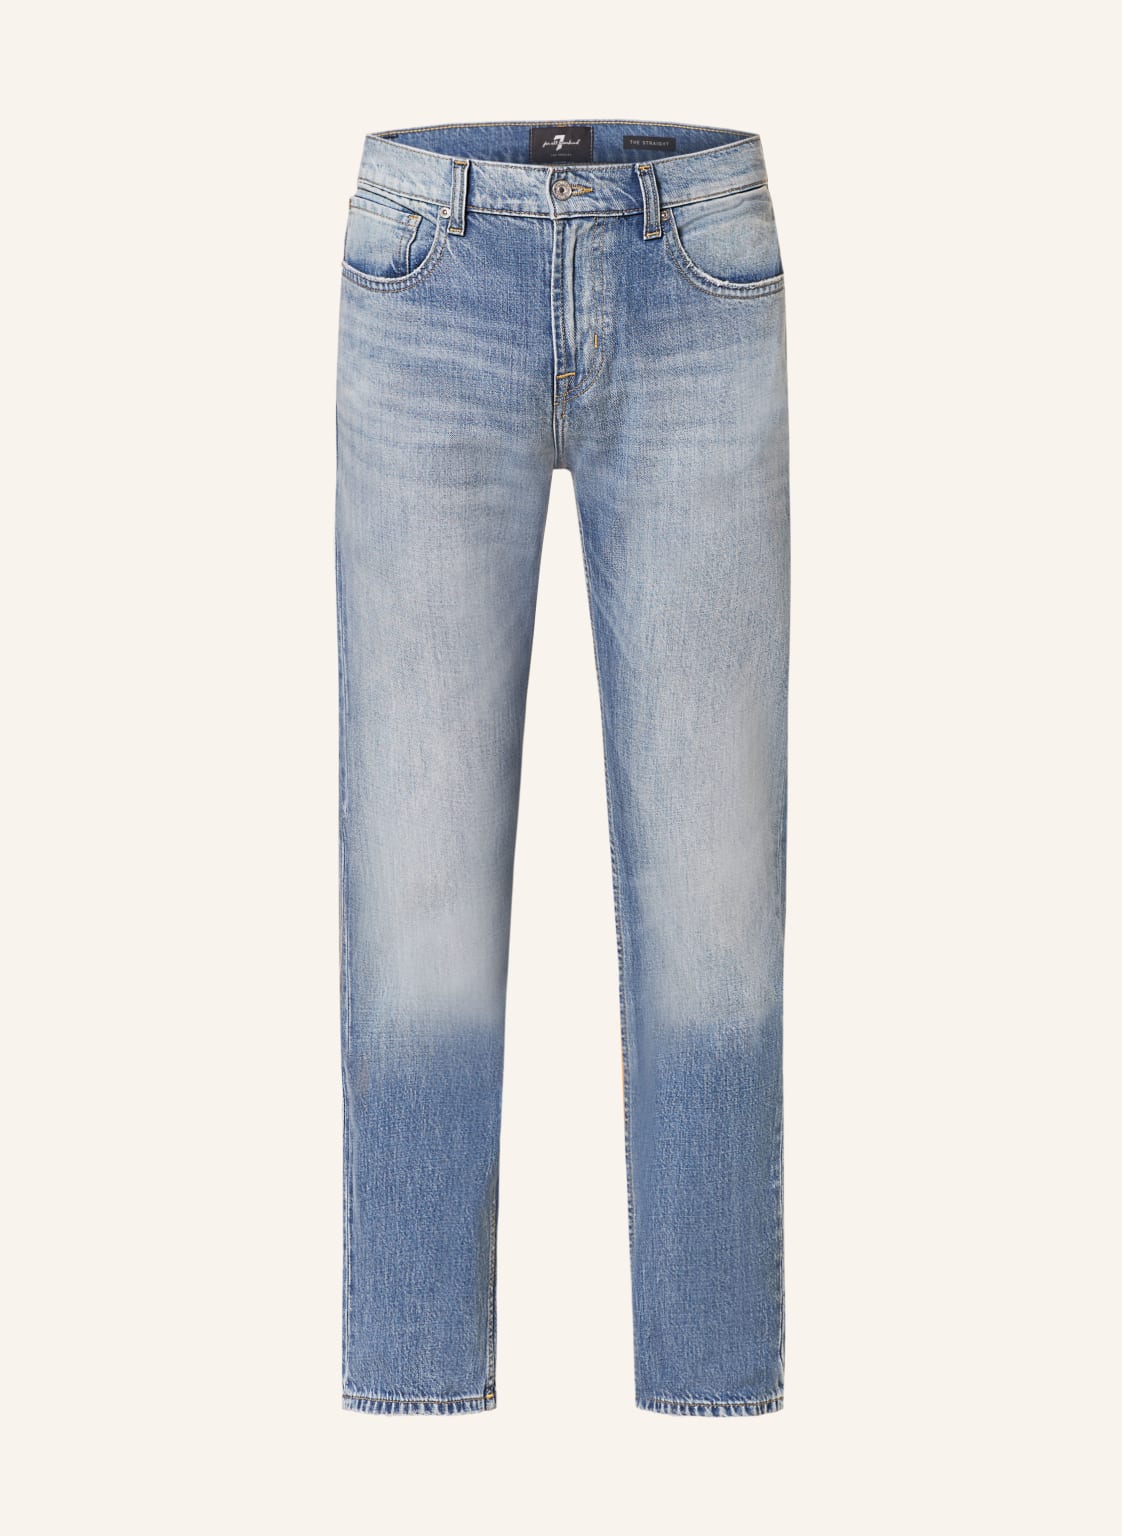 7 For All Mankind Jeans The Straight Straight Fit blau von 7 For All Mankind